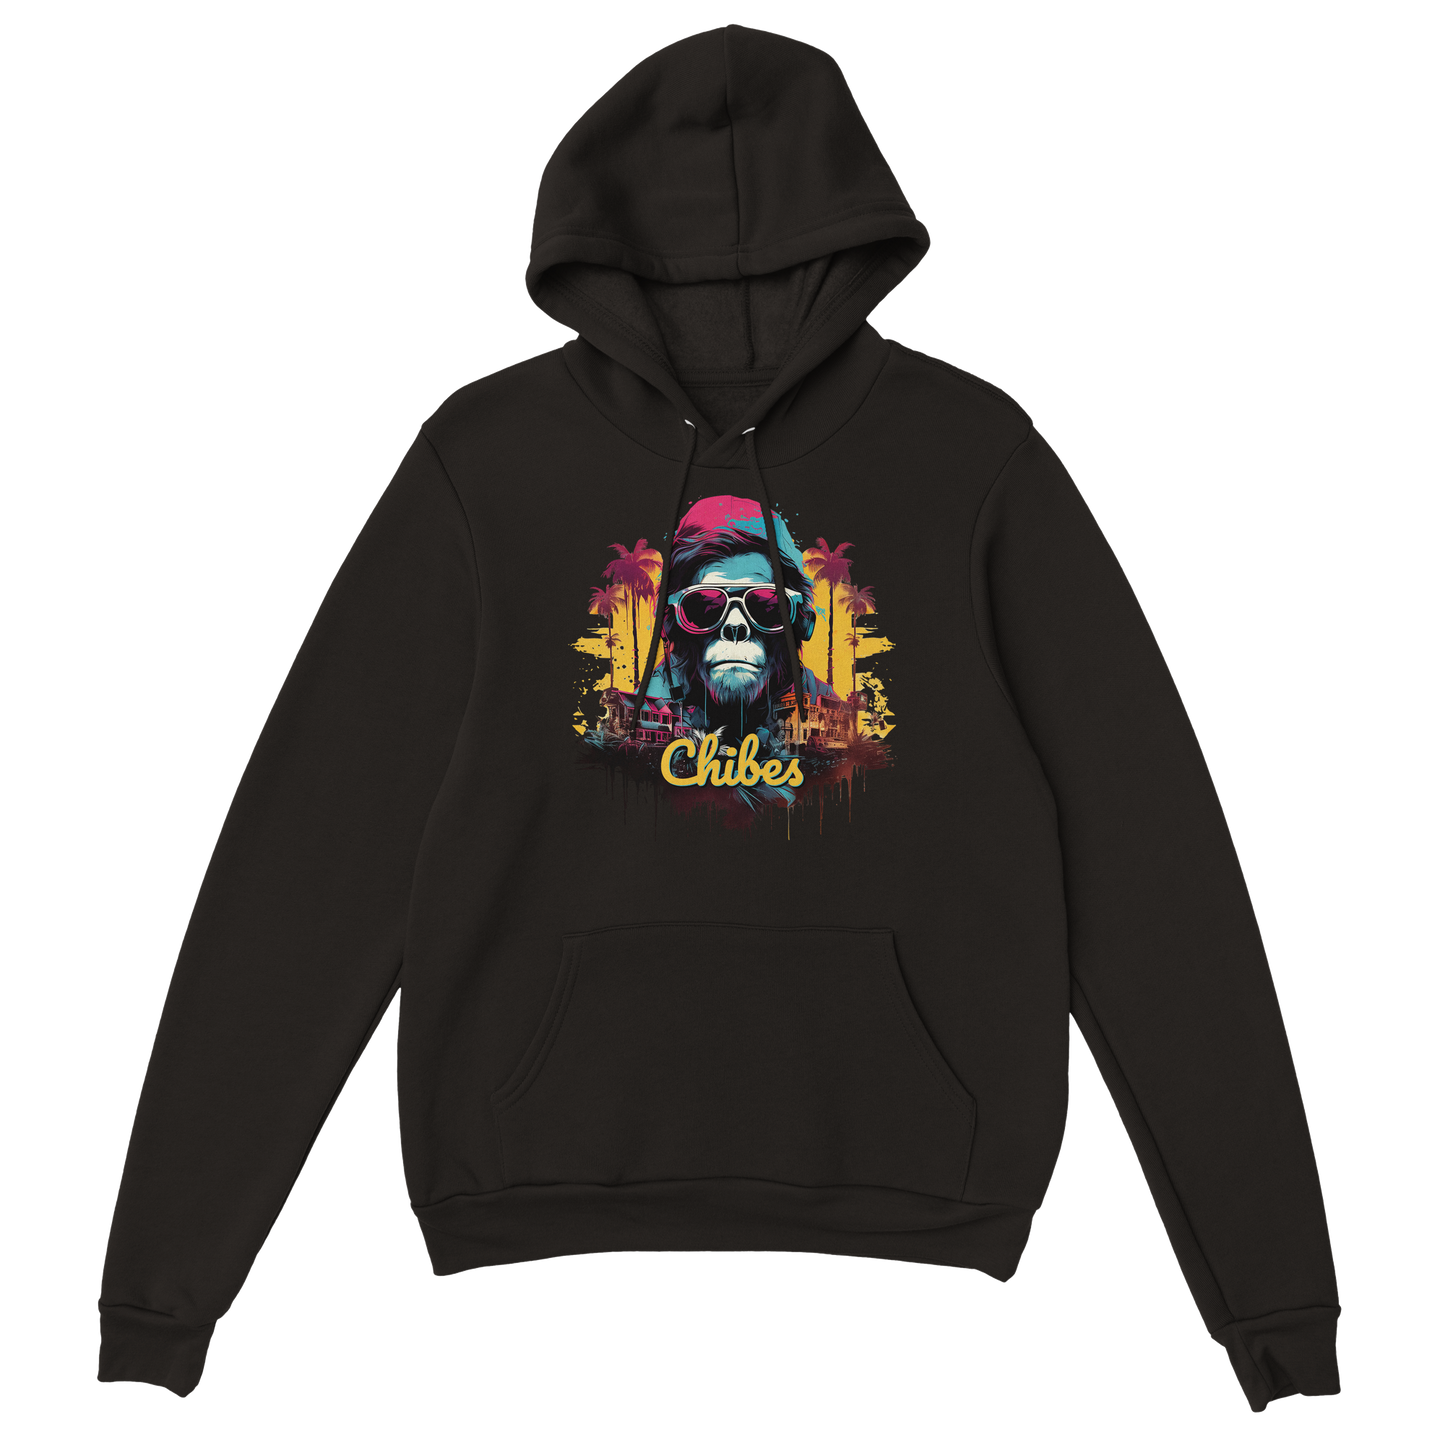 Chibes cool black premium hoodie, 'Monkey Business'. For men and women.